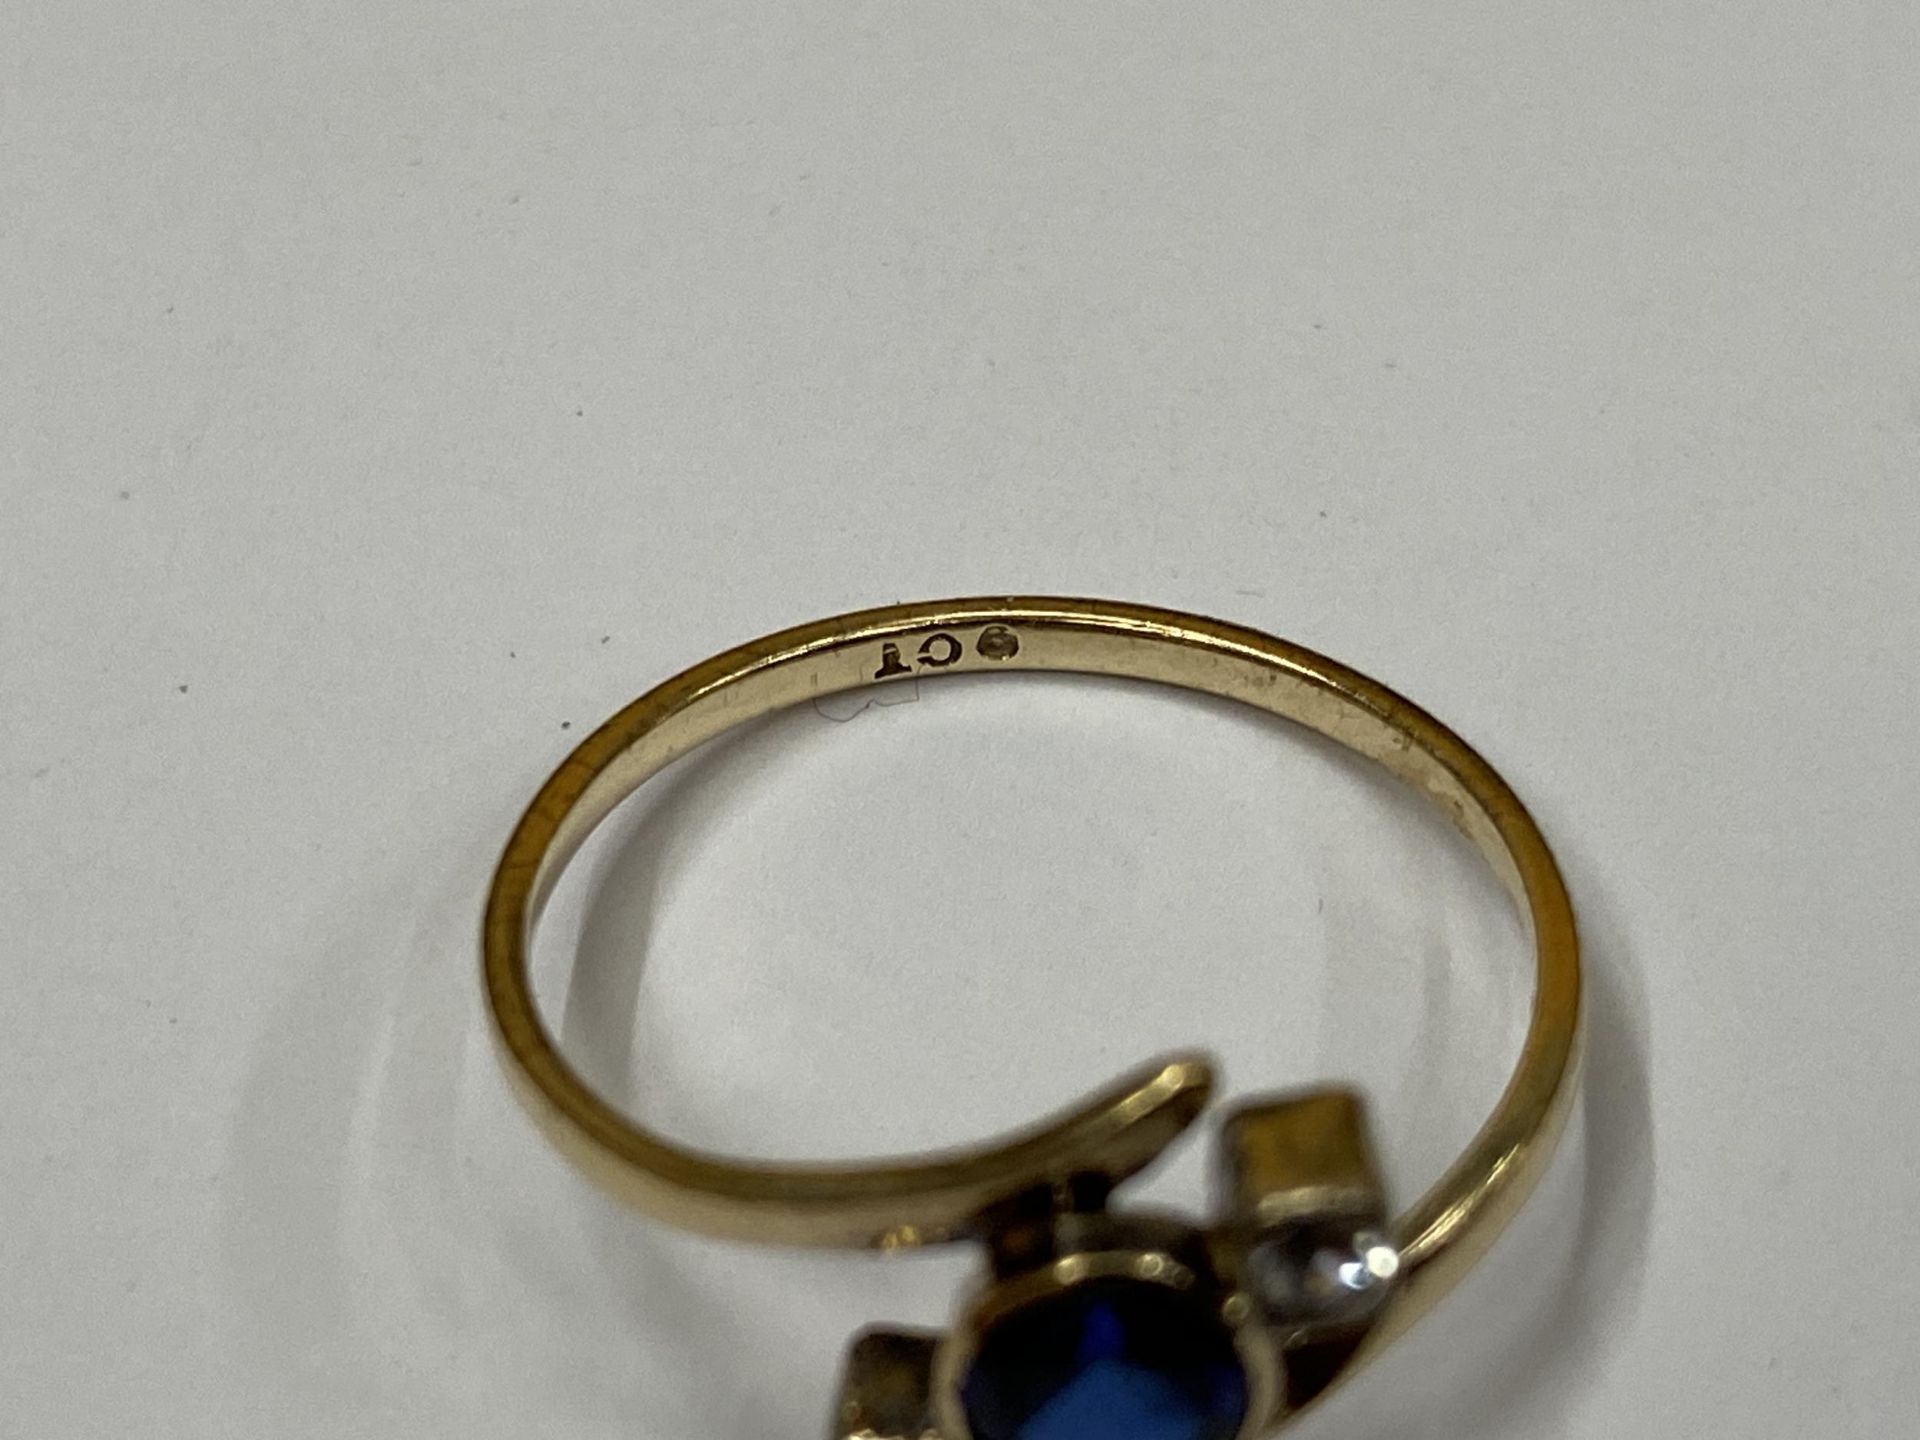 A 9CT YELLOW GOLD SAPPHIRE STYLE AND CZ STONE RING, WEIGHT 1.27G - Image 2 of 2